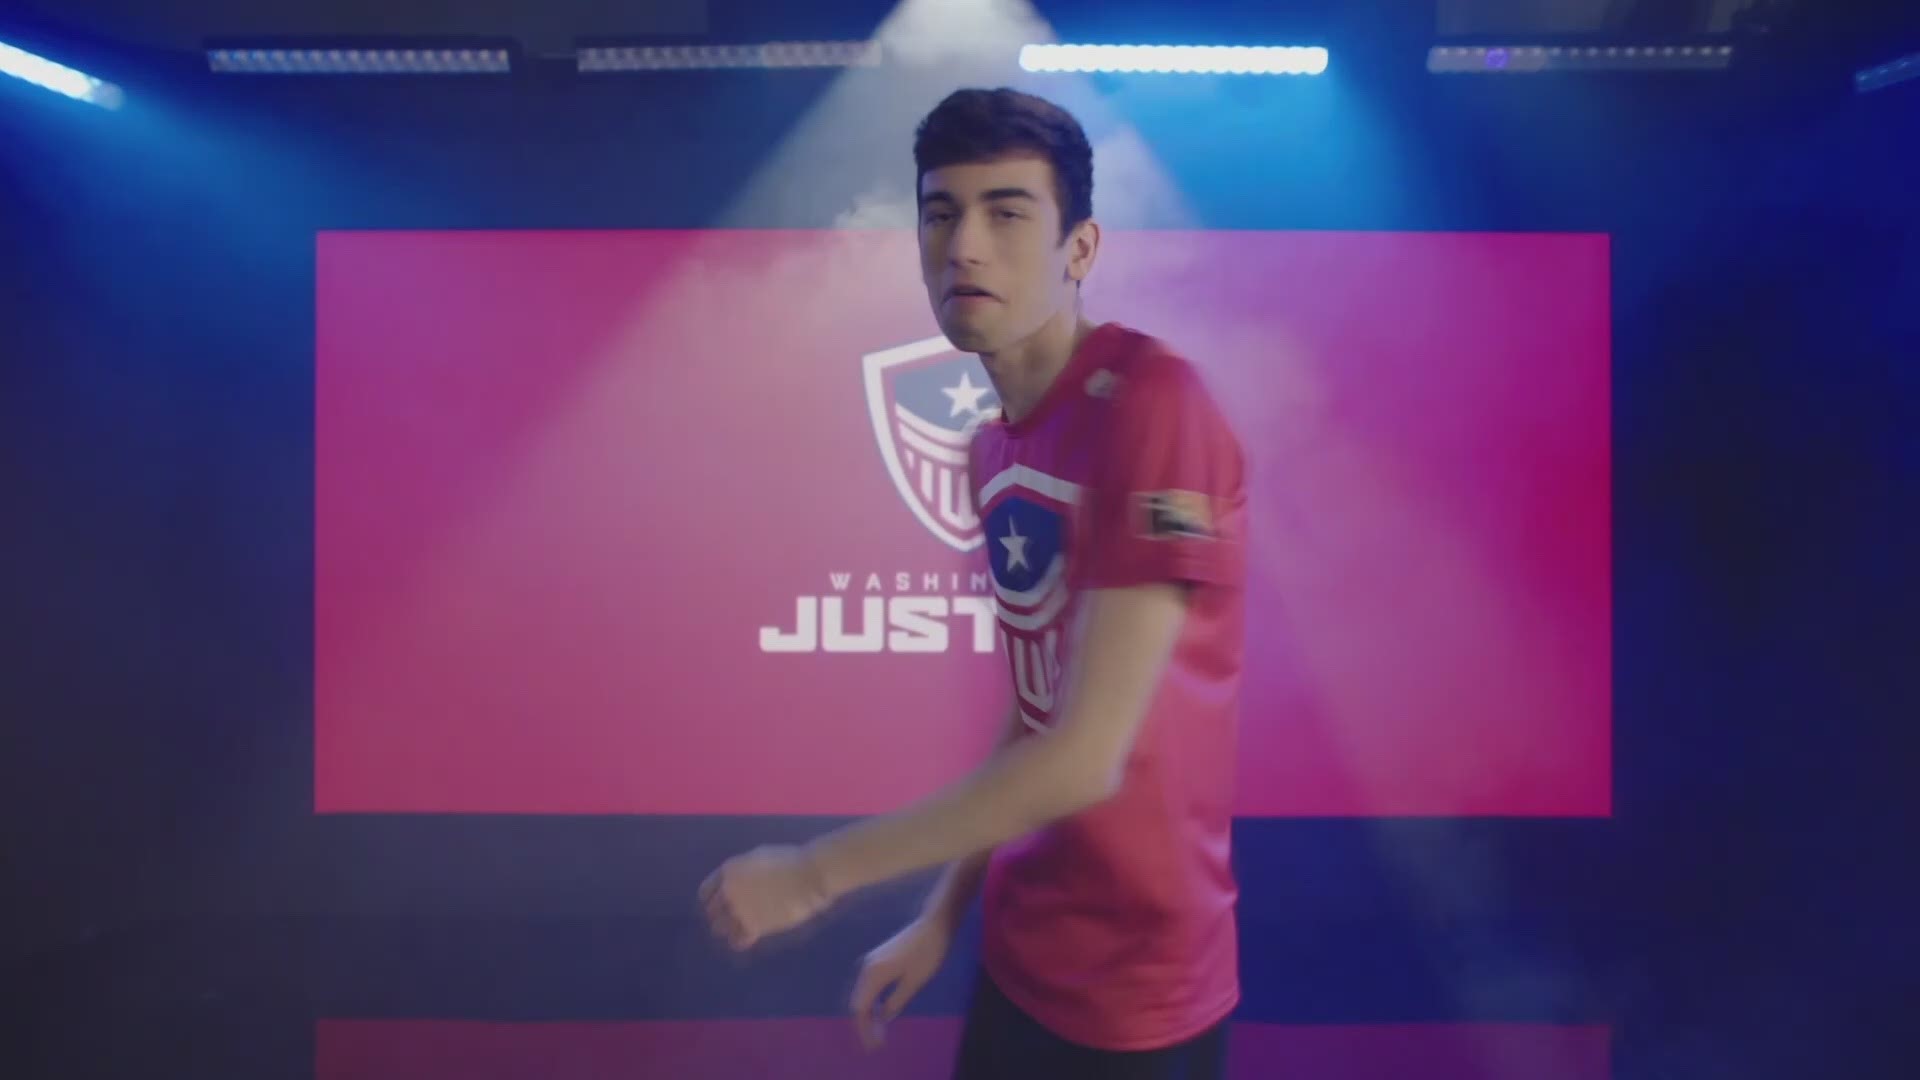 In a 2020 season outlook put out by the Overwatch League, it says the Justice could be "a force" in the league.